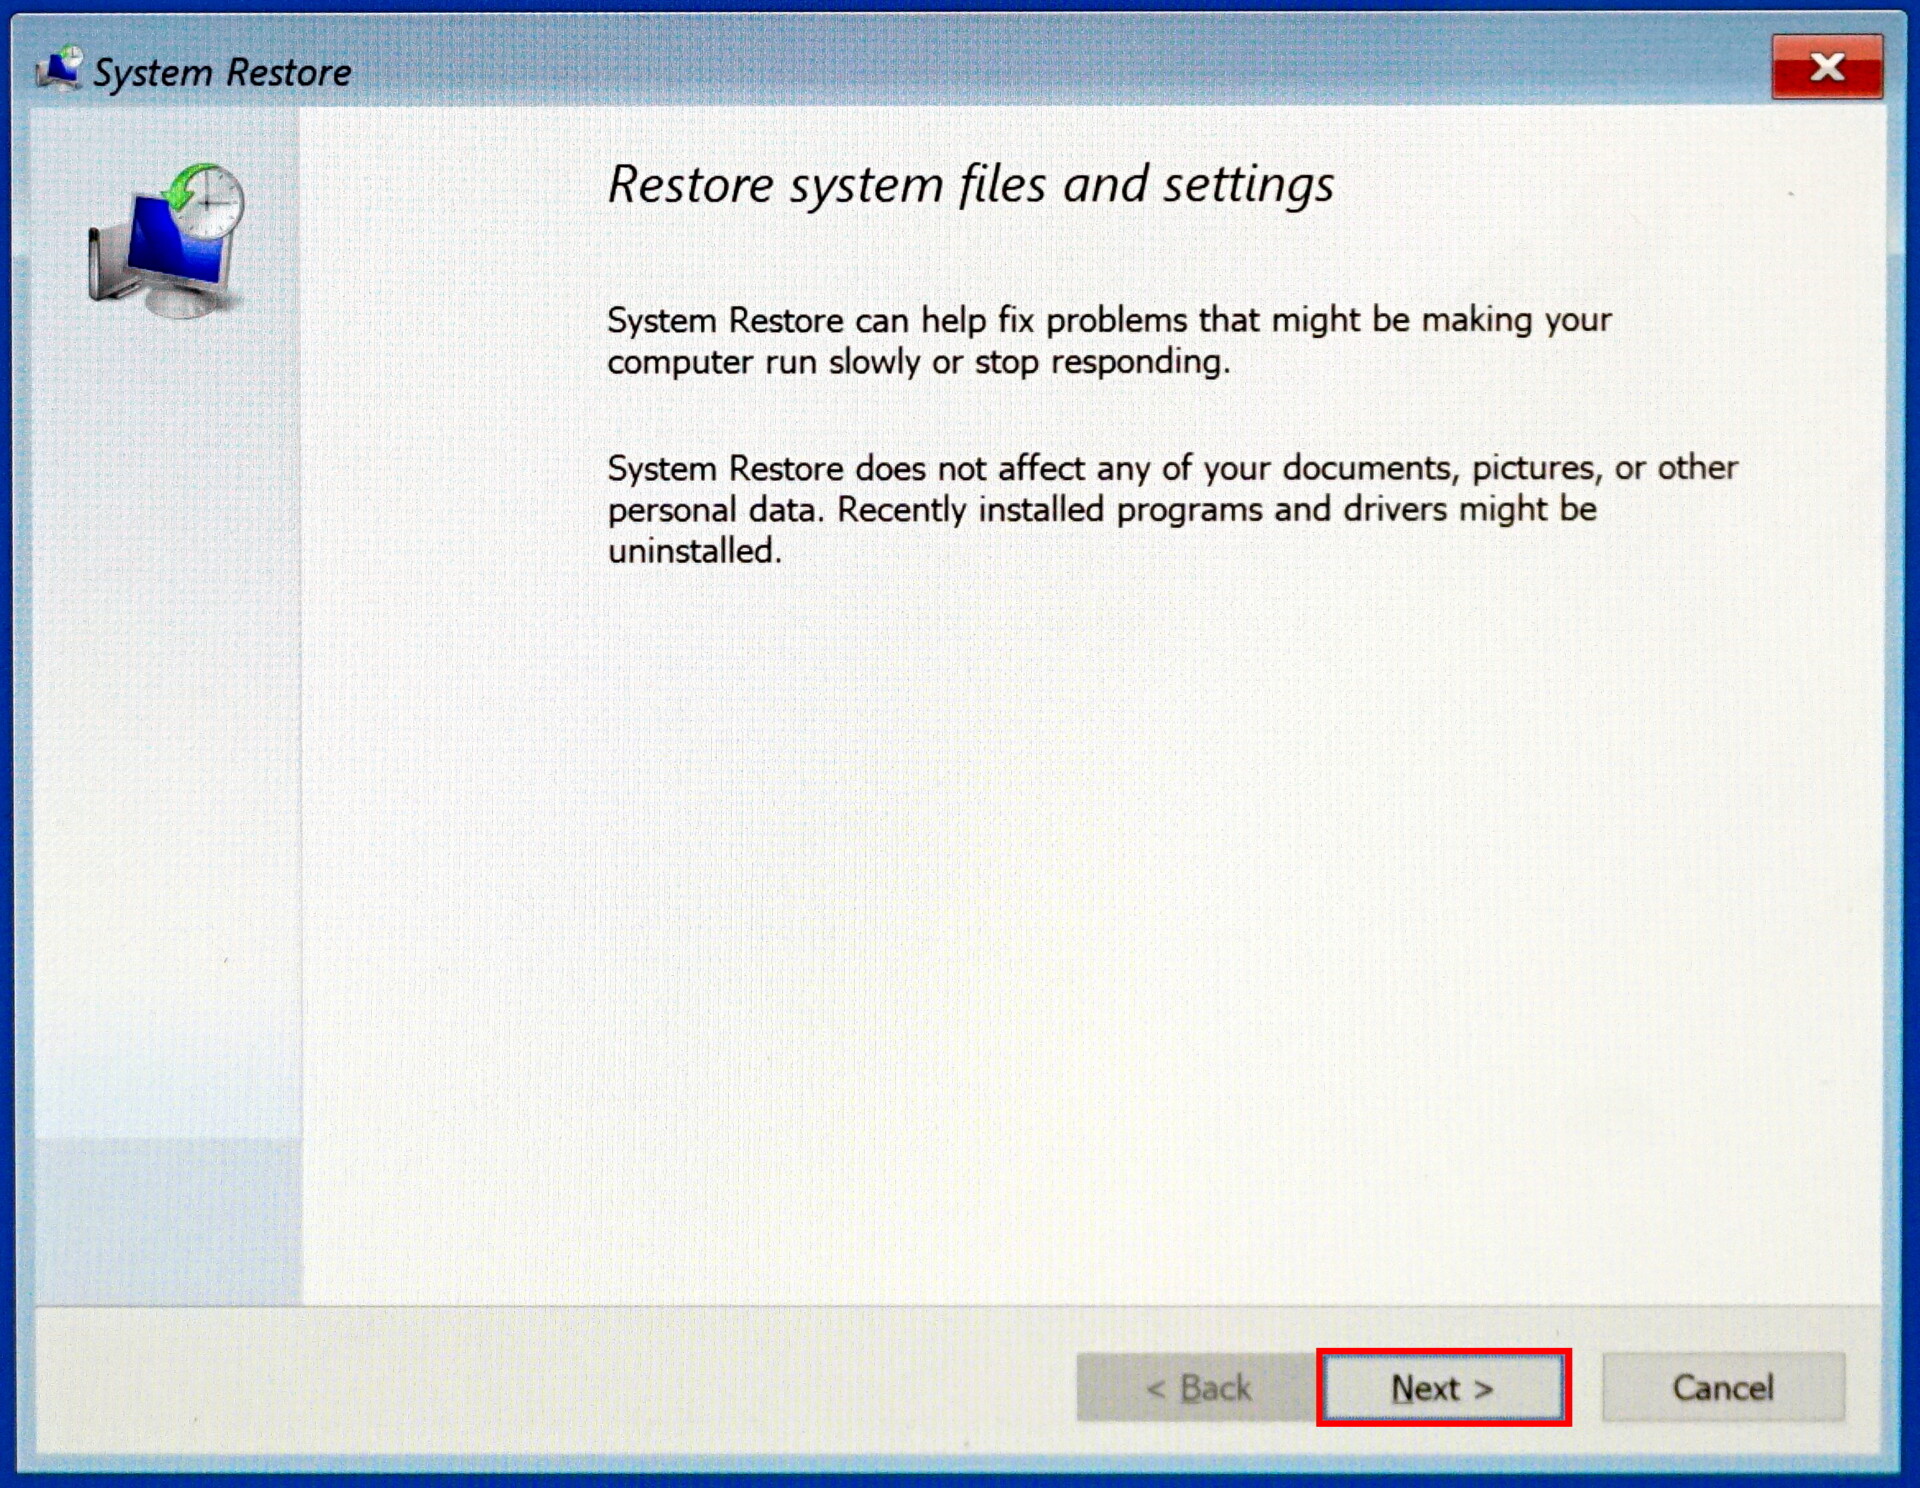 Windows 10 System Restore pop up - how to do a System Restore on Windows 10